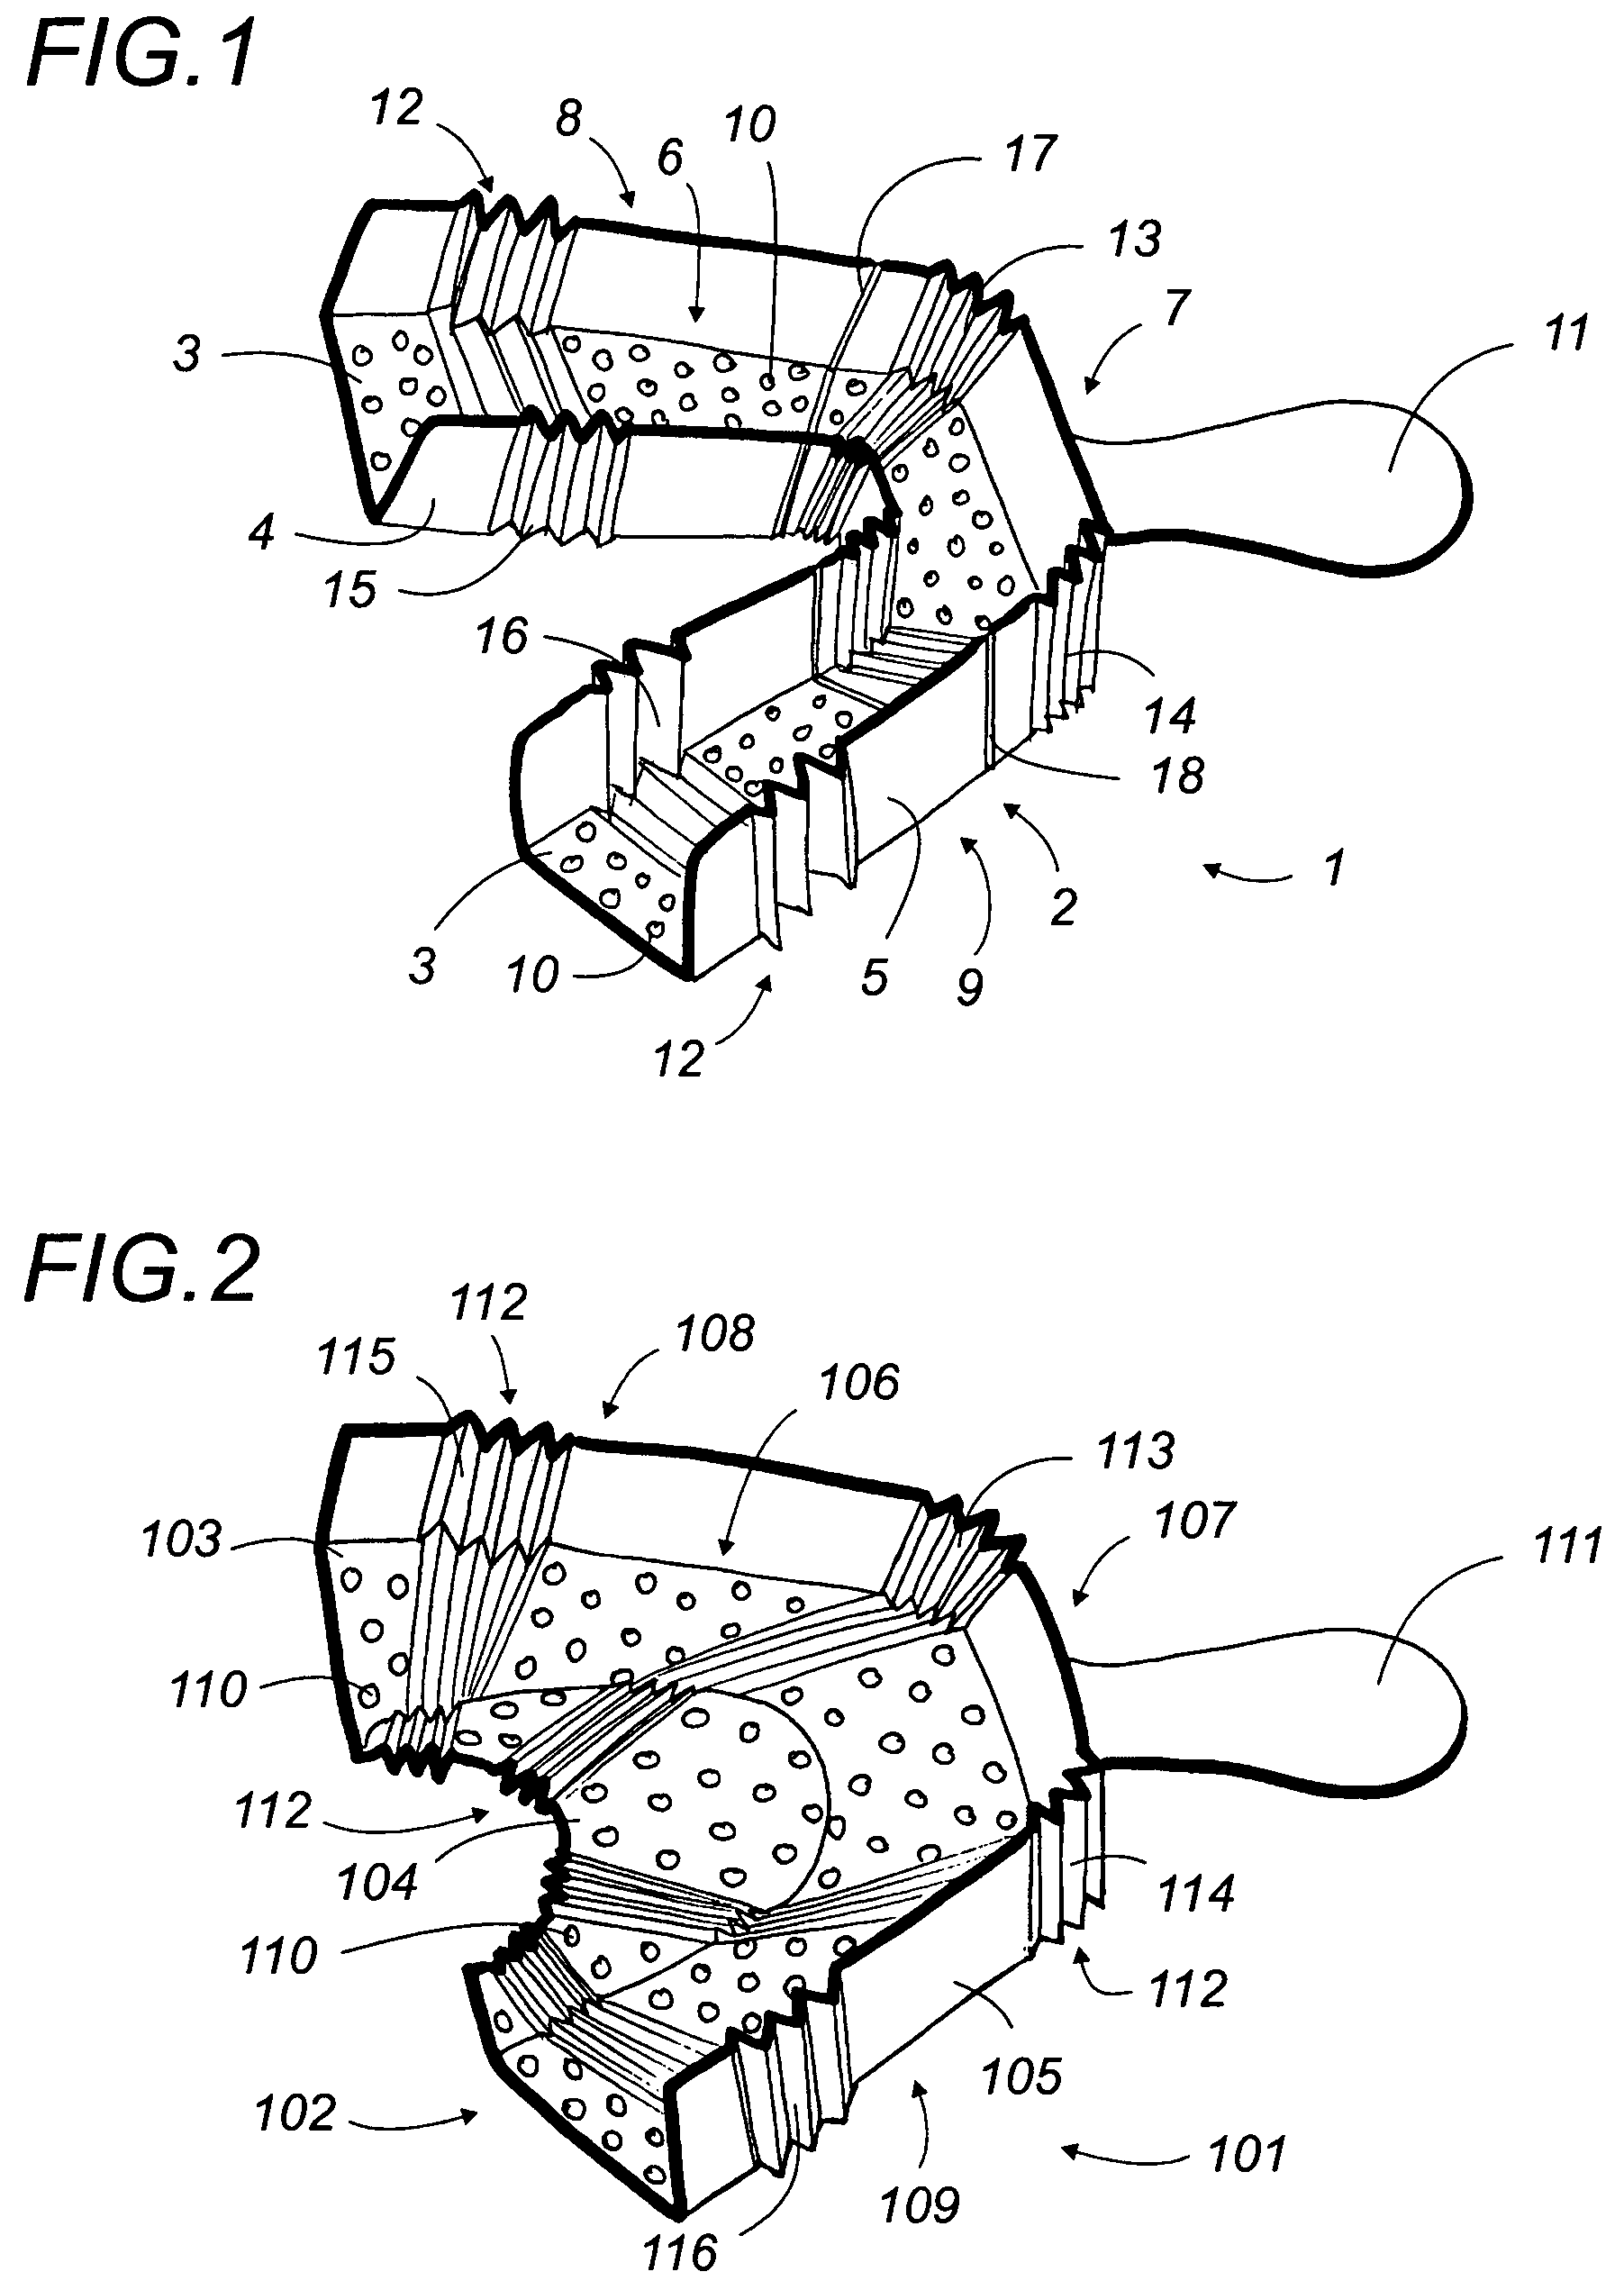 Adjustable impression tray with variable geometry